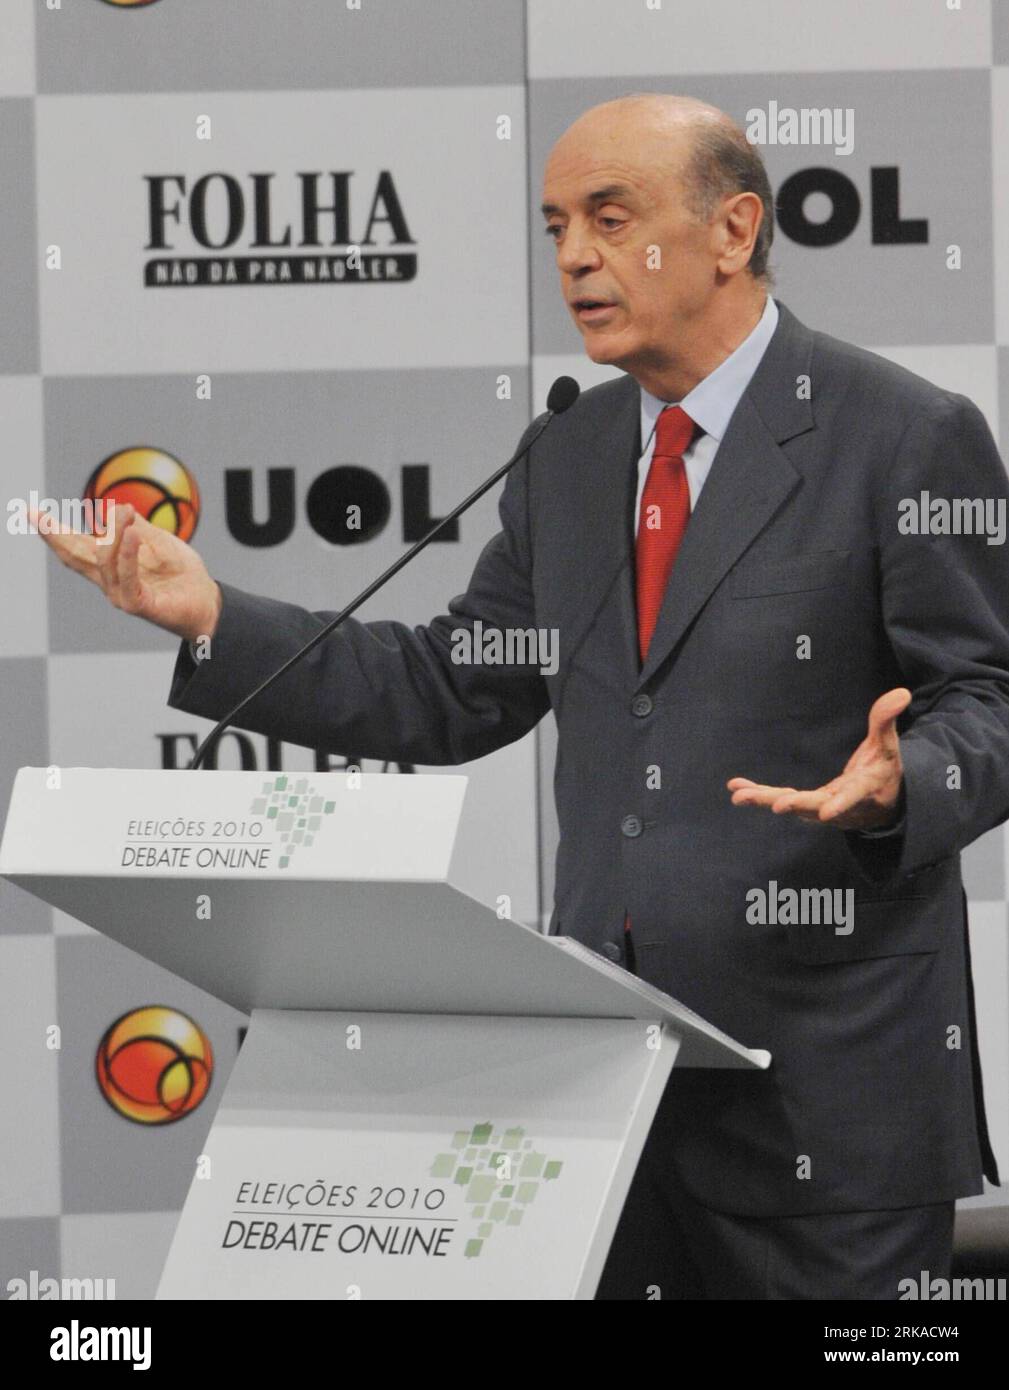 Bildnummer: 54312587  Datum: 18.08.2010  Copyright: imago/Xinhua (100818) -- SAO PAULO, Aug. 18, 2010 (Xinhua) -- Brazilian presidential candidate Jose Serra from the Brazilian Social Democratic Party debates for the presidential election in Sao Paulo, Brazil, Aug. 18, 2010. (Xinhua/Song Weiwei) (zw) (3)BRAZIL-SAO PAULO-PRESIDENTIAL ELECTION-DEBATE PUBLICATIONxNOTxINxCHN People Politik kbdig xsk 2010 hoch premiumd xint o0 Wahlen Präsidentschaftswahlen    Bildnummer 54312587 Date 18 08 2010 Copyright Imago XINHUA  Sao Paulo Aug 18 2010 XINHUA Brazilian Presidential Candidate Jose Serra from The Stock Photo